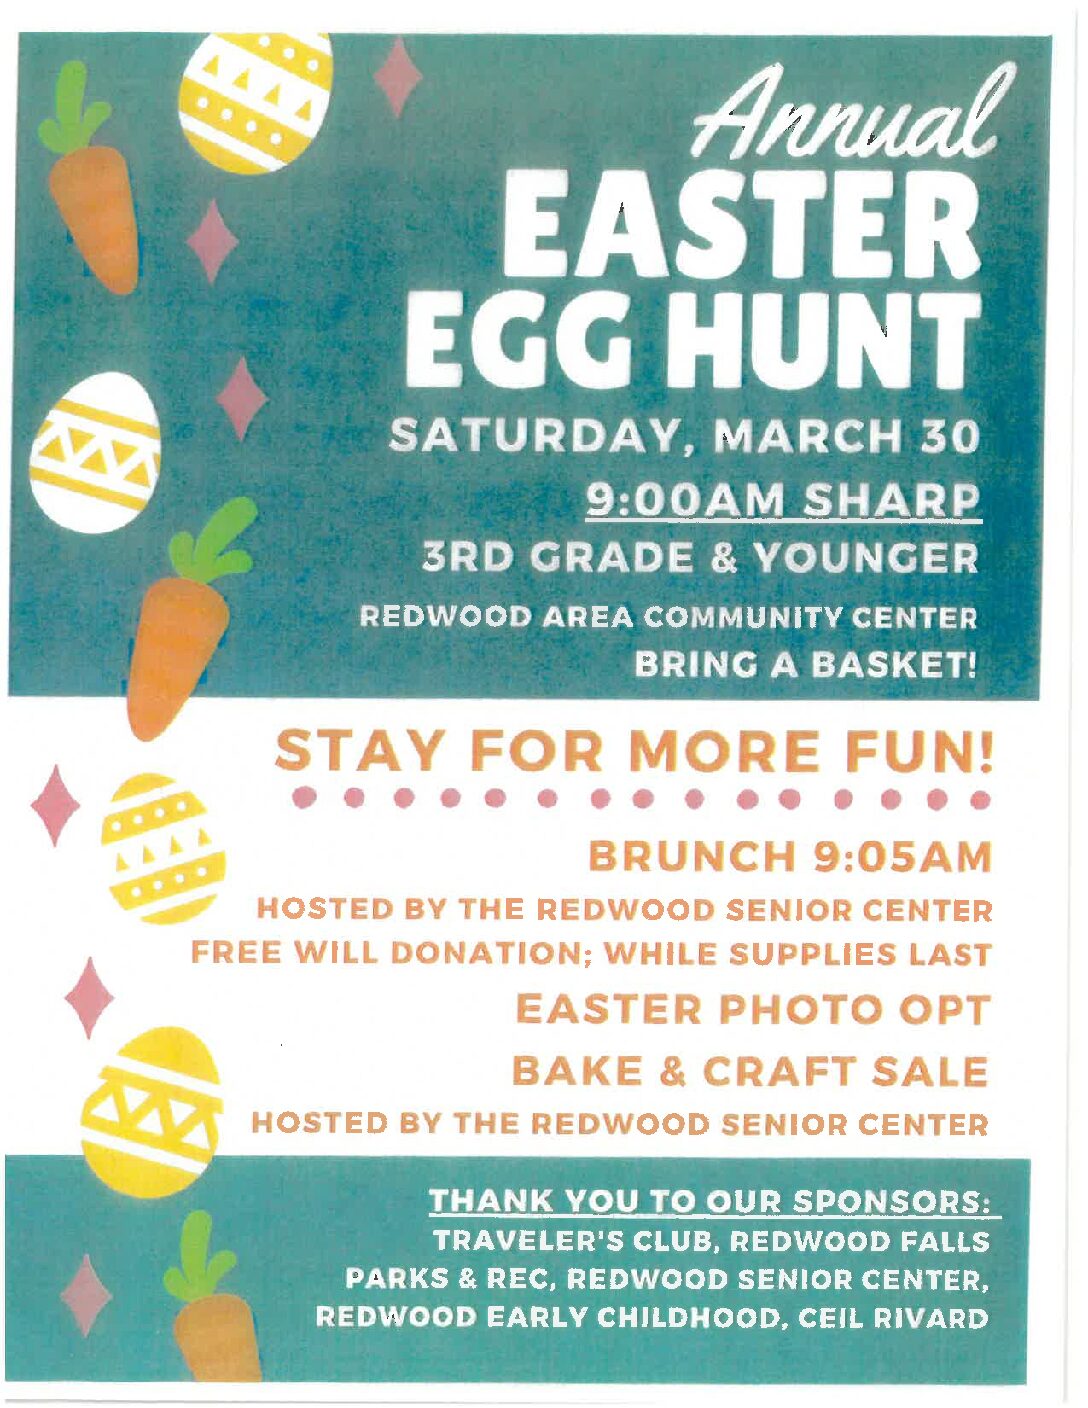 <h1 class="tribe-events-single-event-title">Annual Easter Egg Hunt</h1>